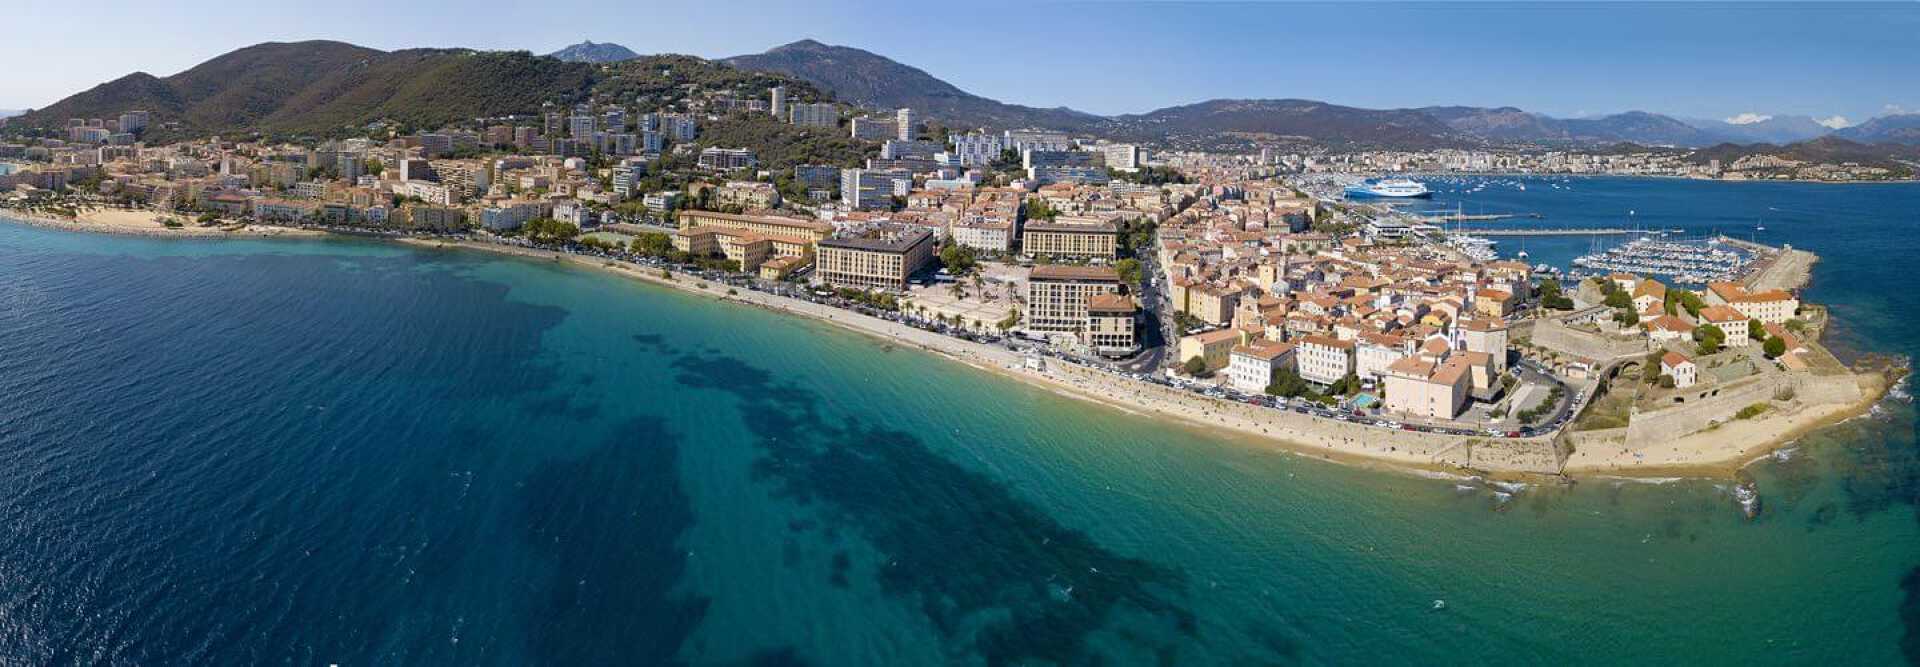 Aerial view of Ajaccio in France showing its beaches and its port